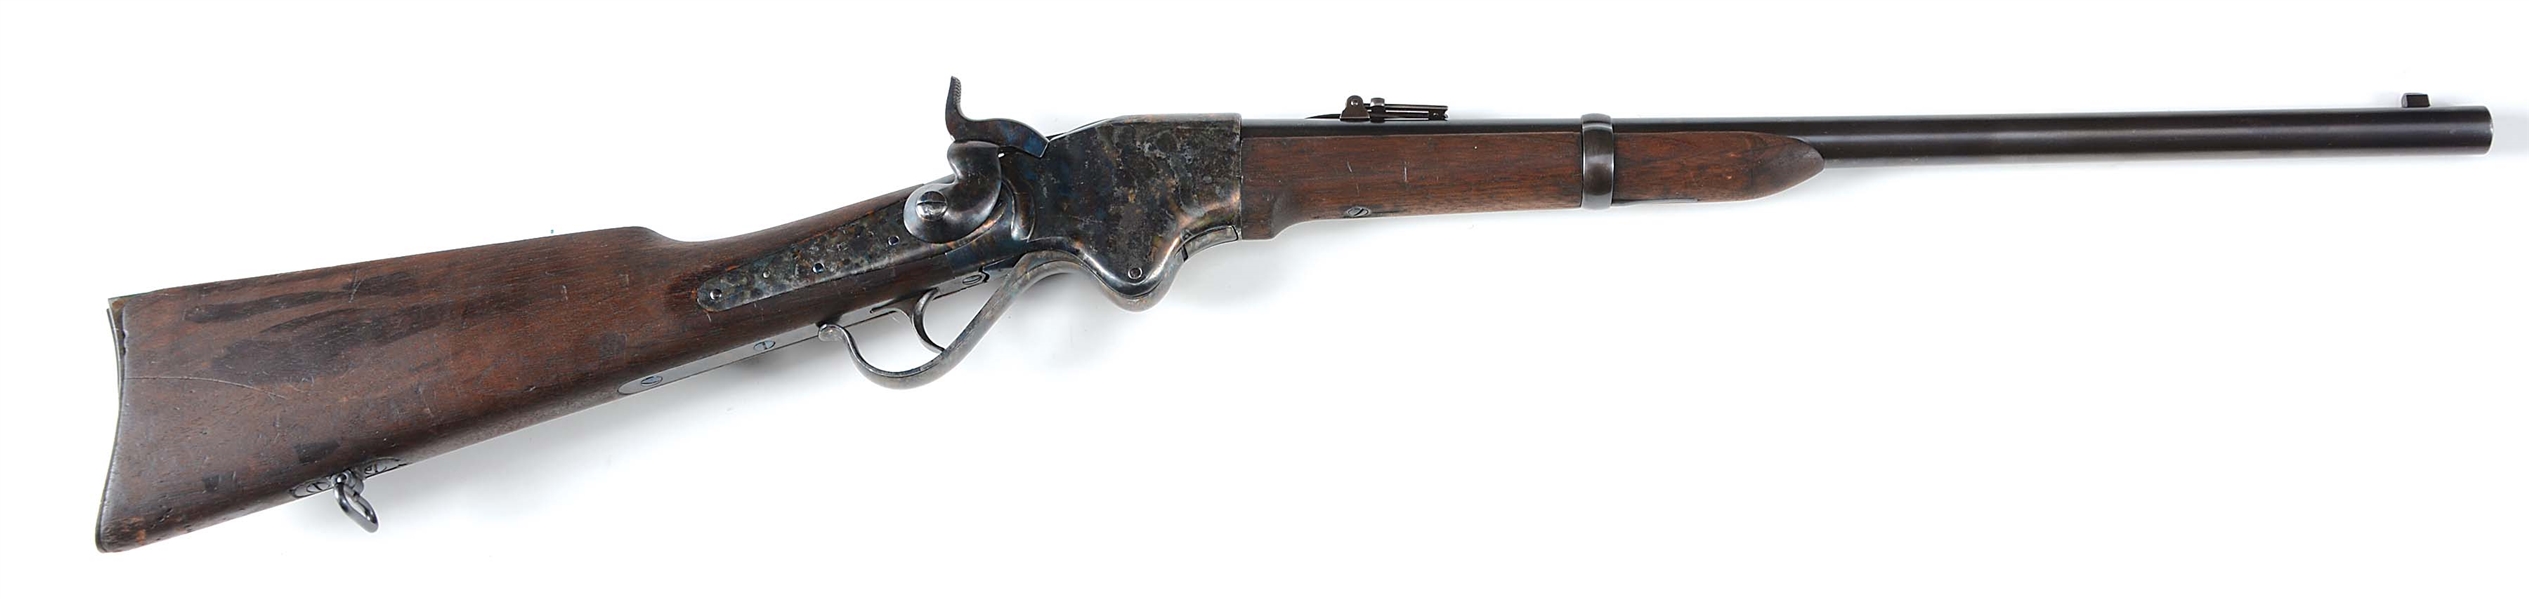 (A) SPENCER 1860 FALLING BLOCK CARBINE WITH RELOADING TOOLS & OTHER ACCESSORIES.